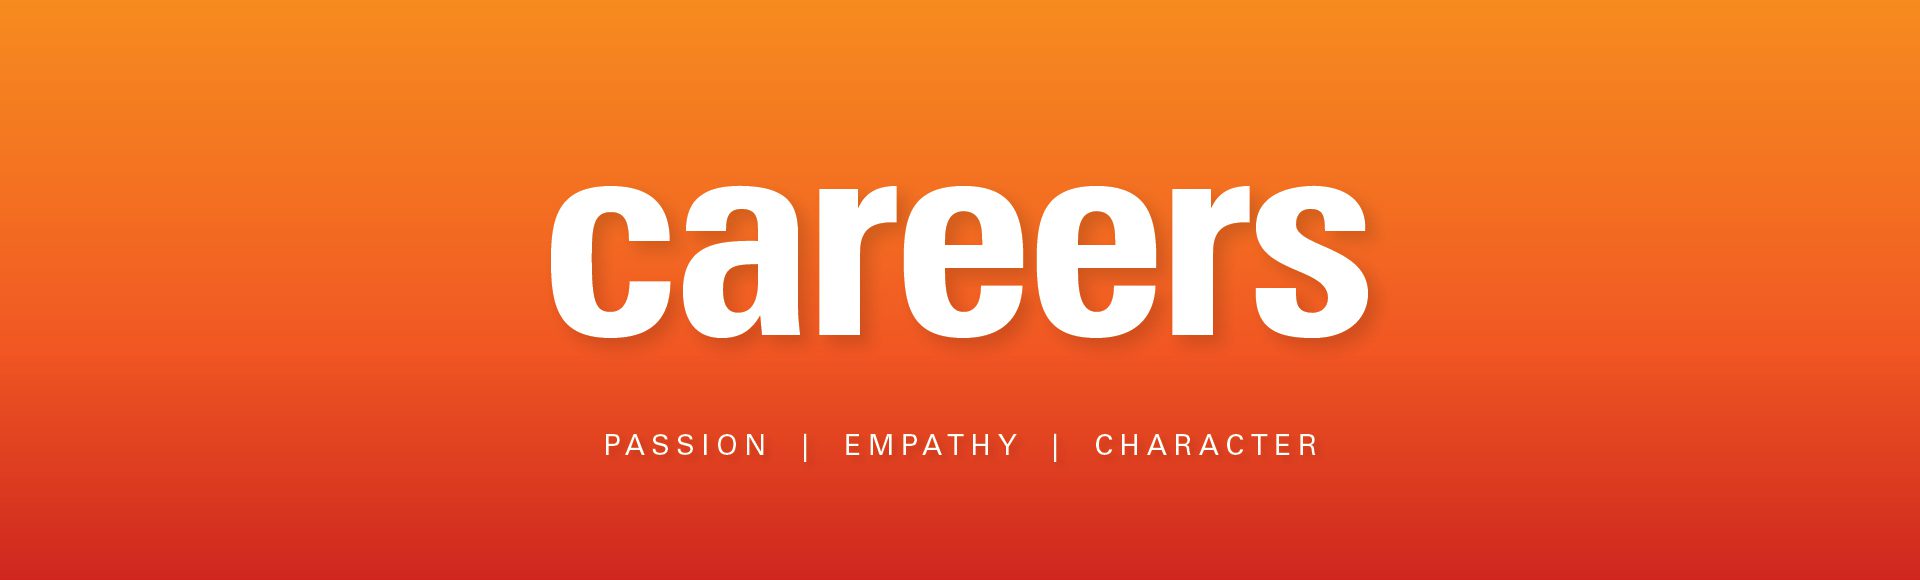 Orange background with white text that reads Careers